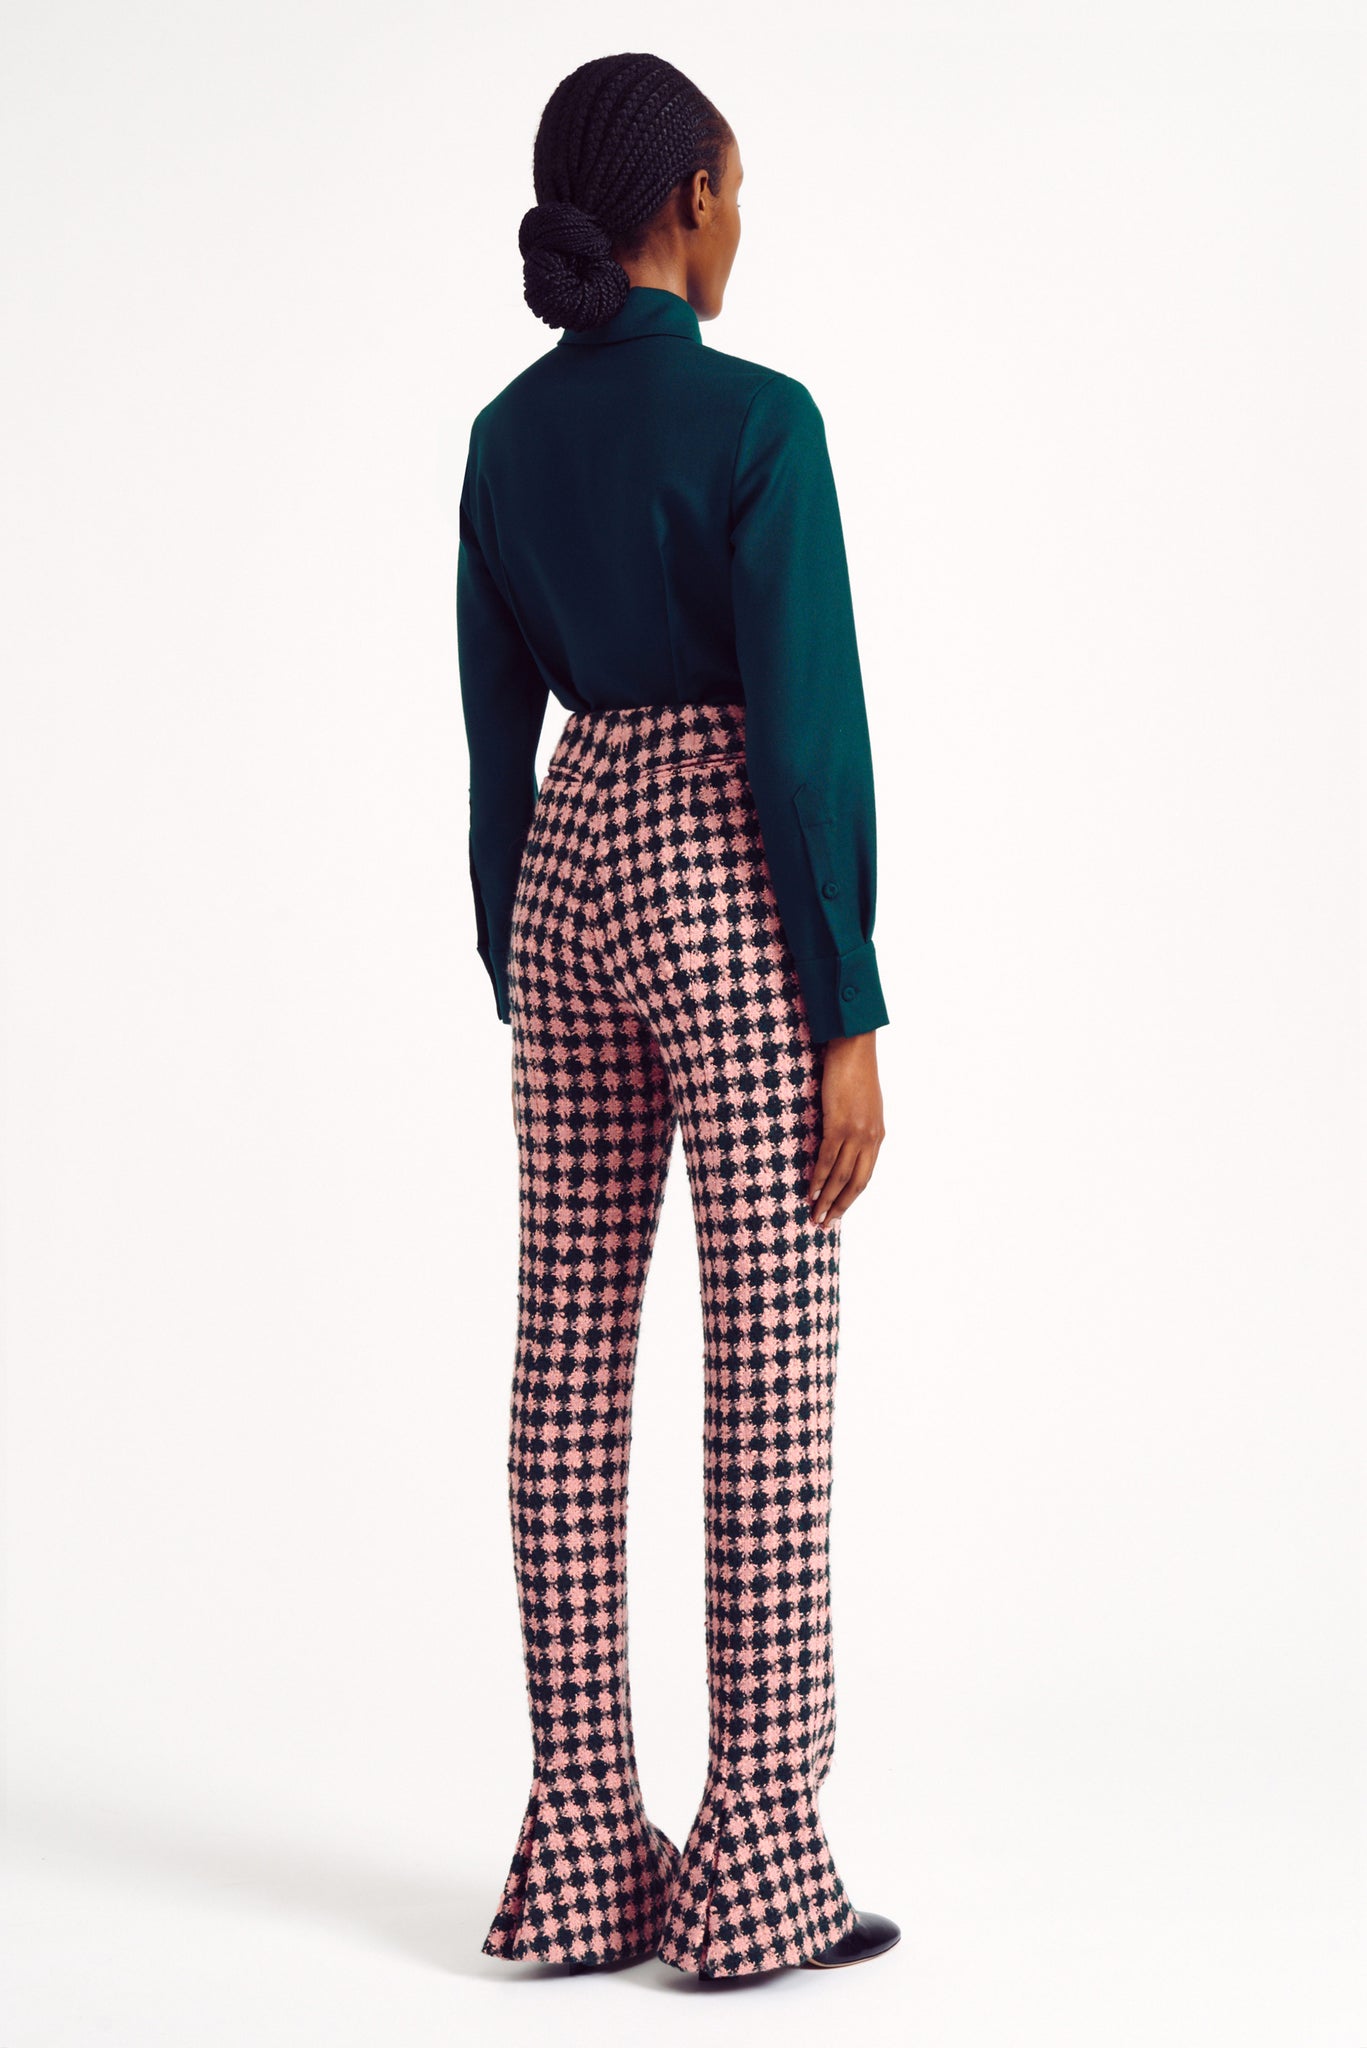 Avalon Green & Pink Houndstooth Boucle Trousers | Emilia Wickstead